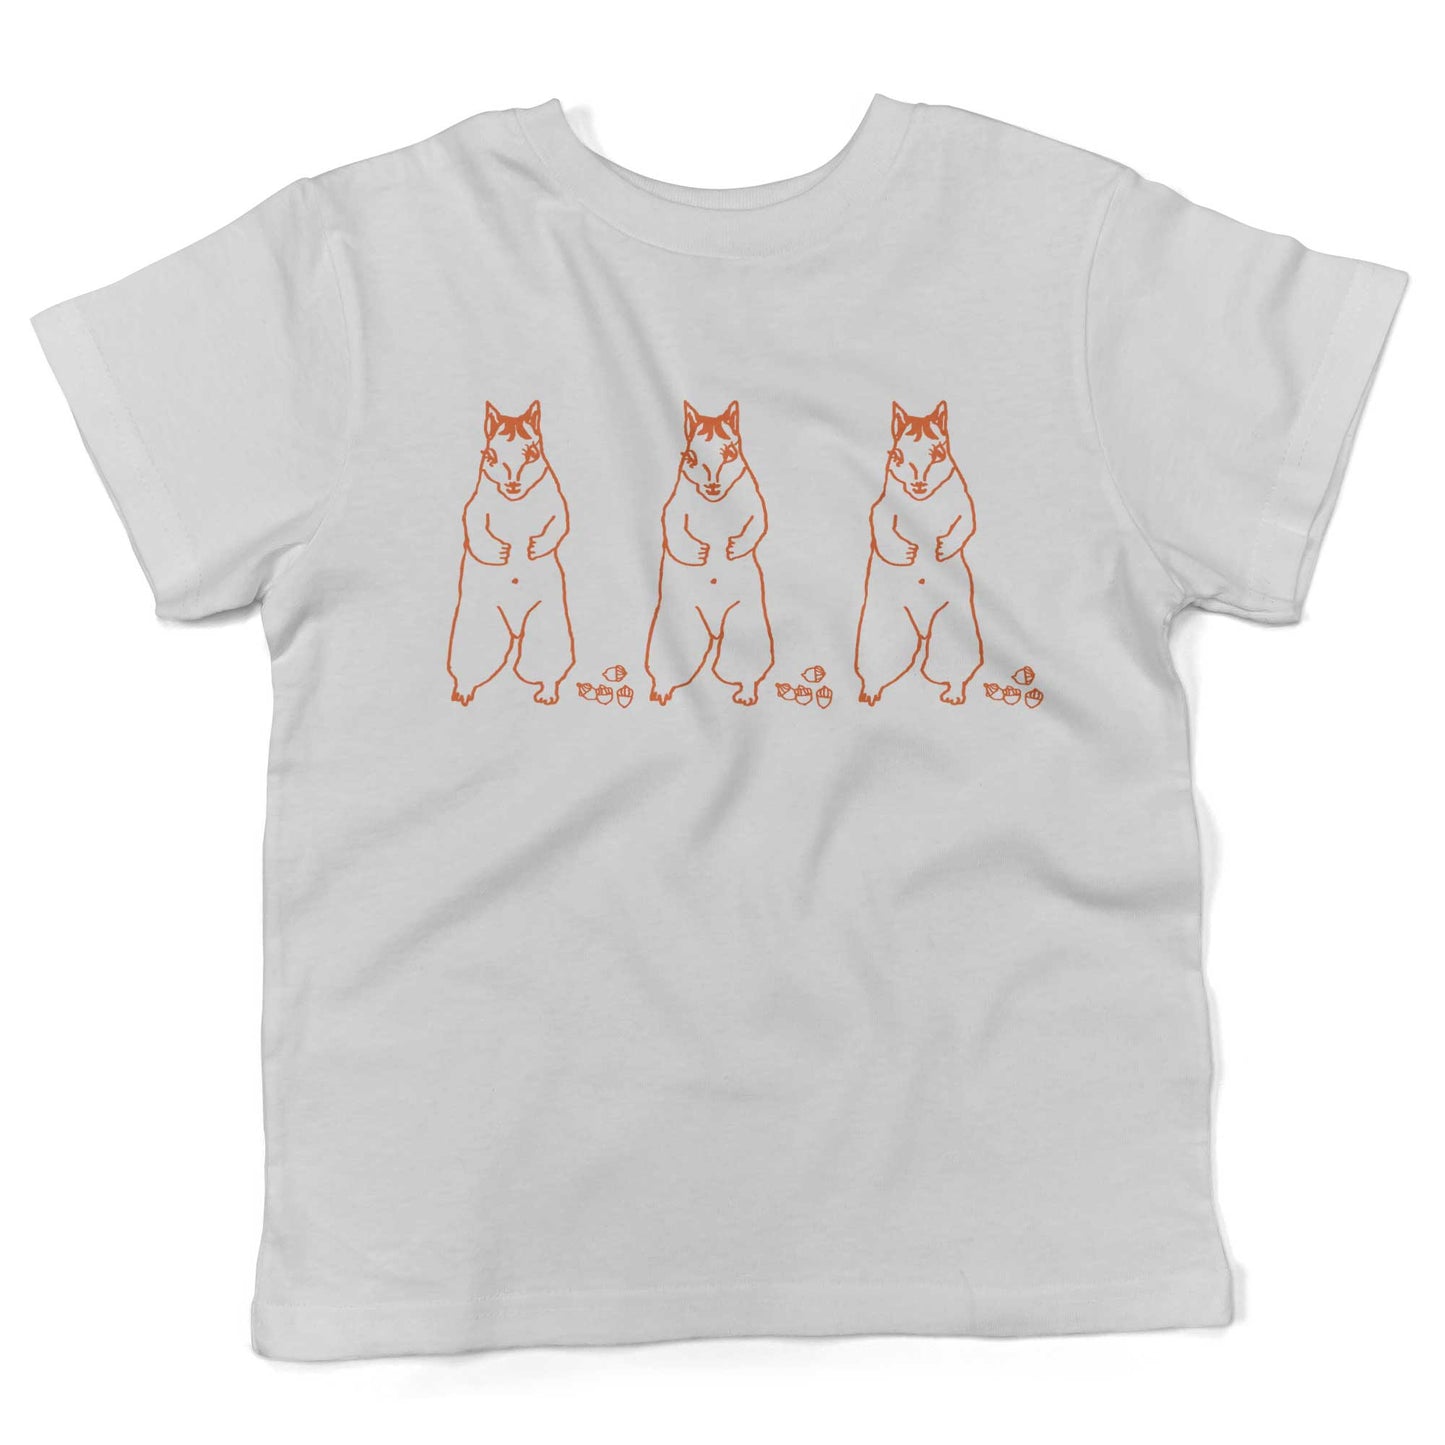 Cute Dancing Squirrels With Nuts Toddler Shirt-White-2T